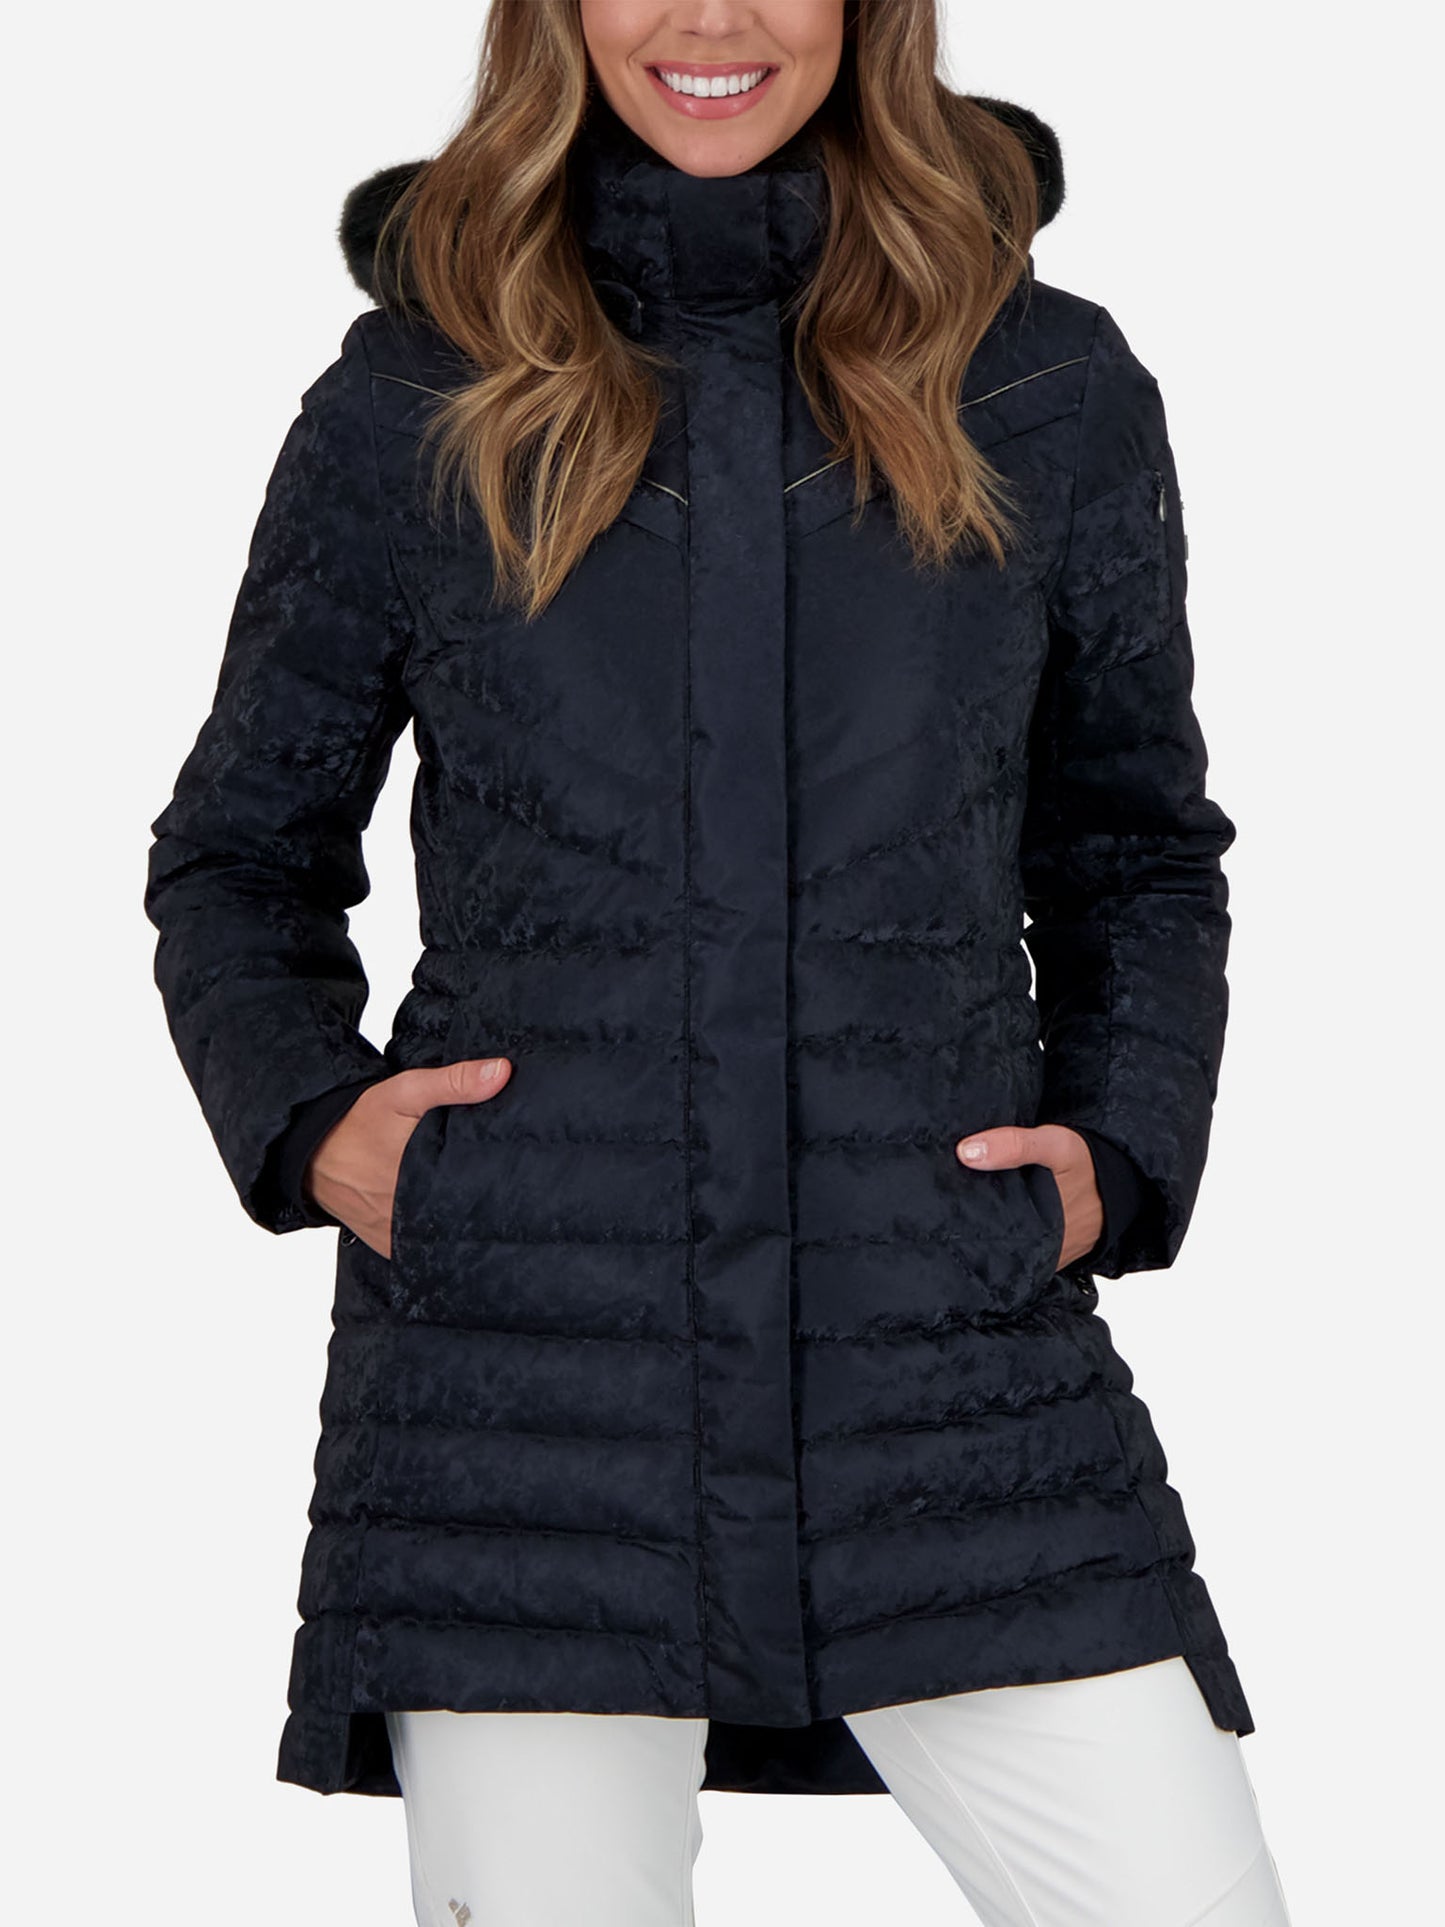 Obermeyer Women's Blossom Down Parka with Faux Fur